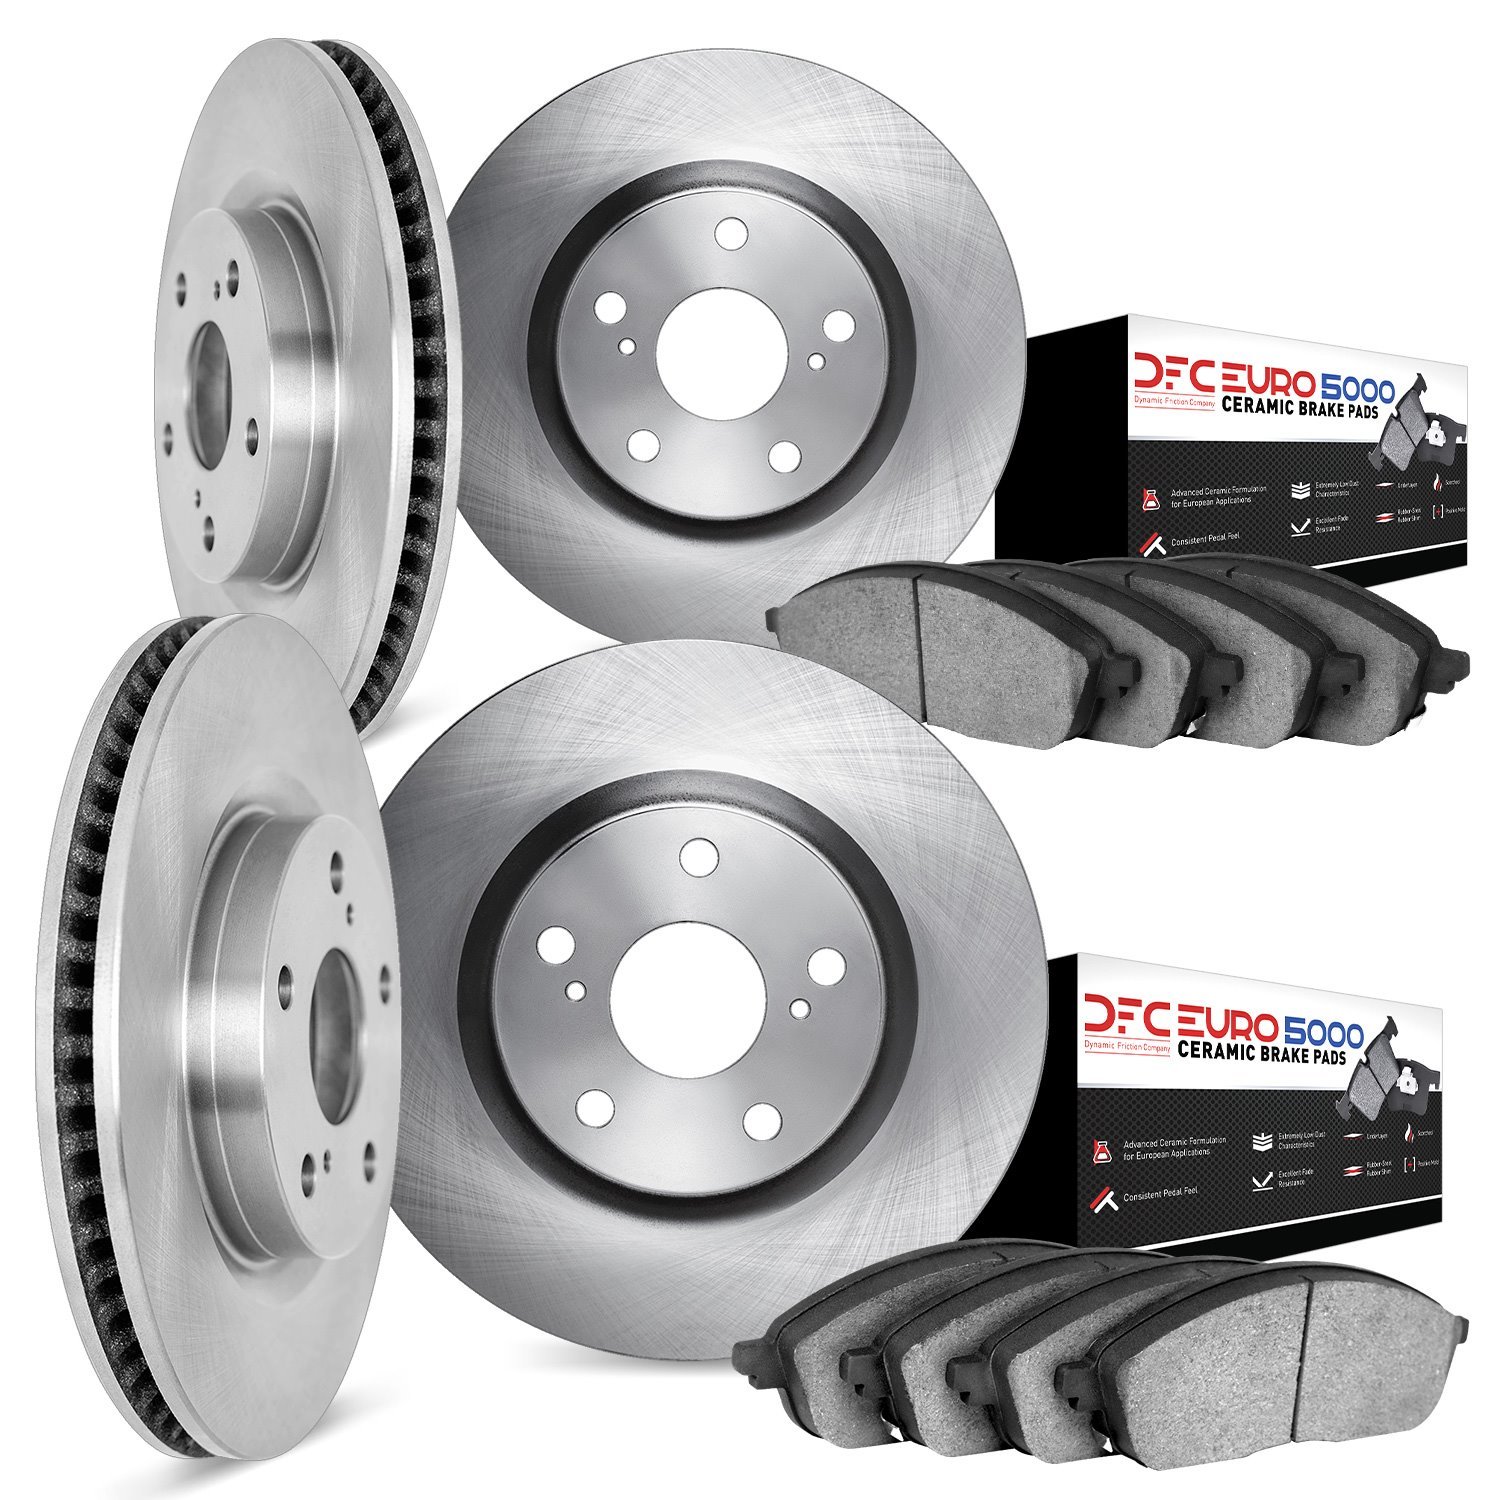 6604-63031 Brake Rotors w/5000 Euro Ceramic Brake Pads, 2018-2019 Mercedes-Benz, Position: Front and Rear